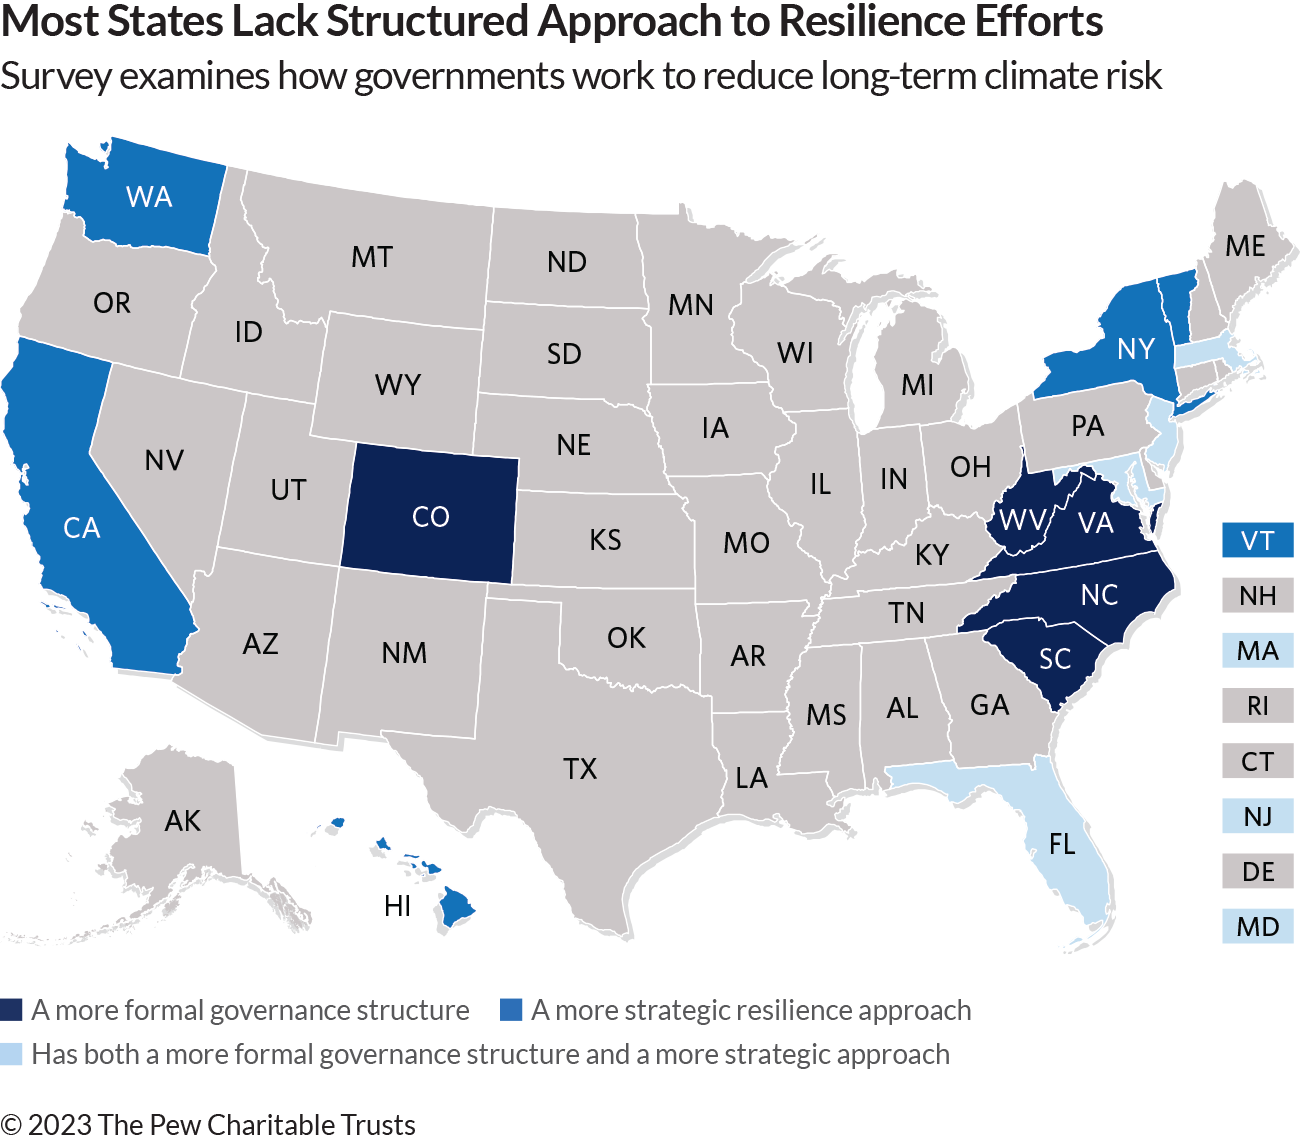 Most States Lack Structured Approach to Resilience Efforts: Survey examines how governments work to reduce long-term climate risk. The map highlights CO, NC, SC, VA, and WV in dark blue indicating they have a more formal governance structure, CA, NY, VT, and WA in bright blue indicating they have a more strategic resilience approach, and FL, MA, MD, and NJ in light blue indicating they have both a more formal governance structure and a more strategic approach